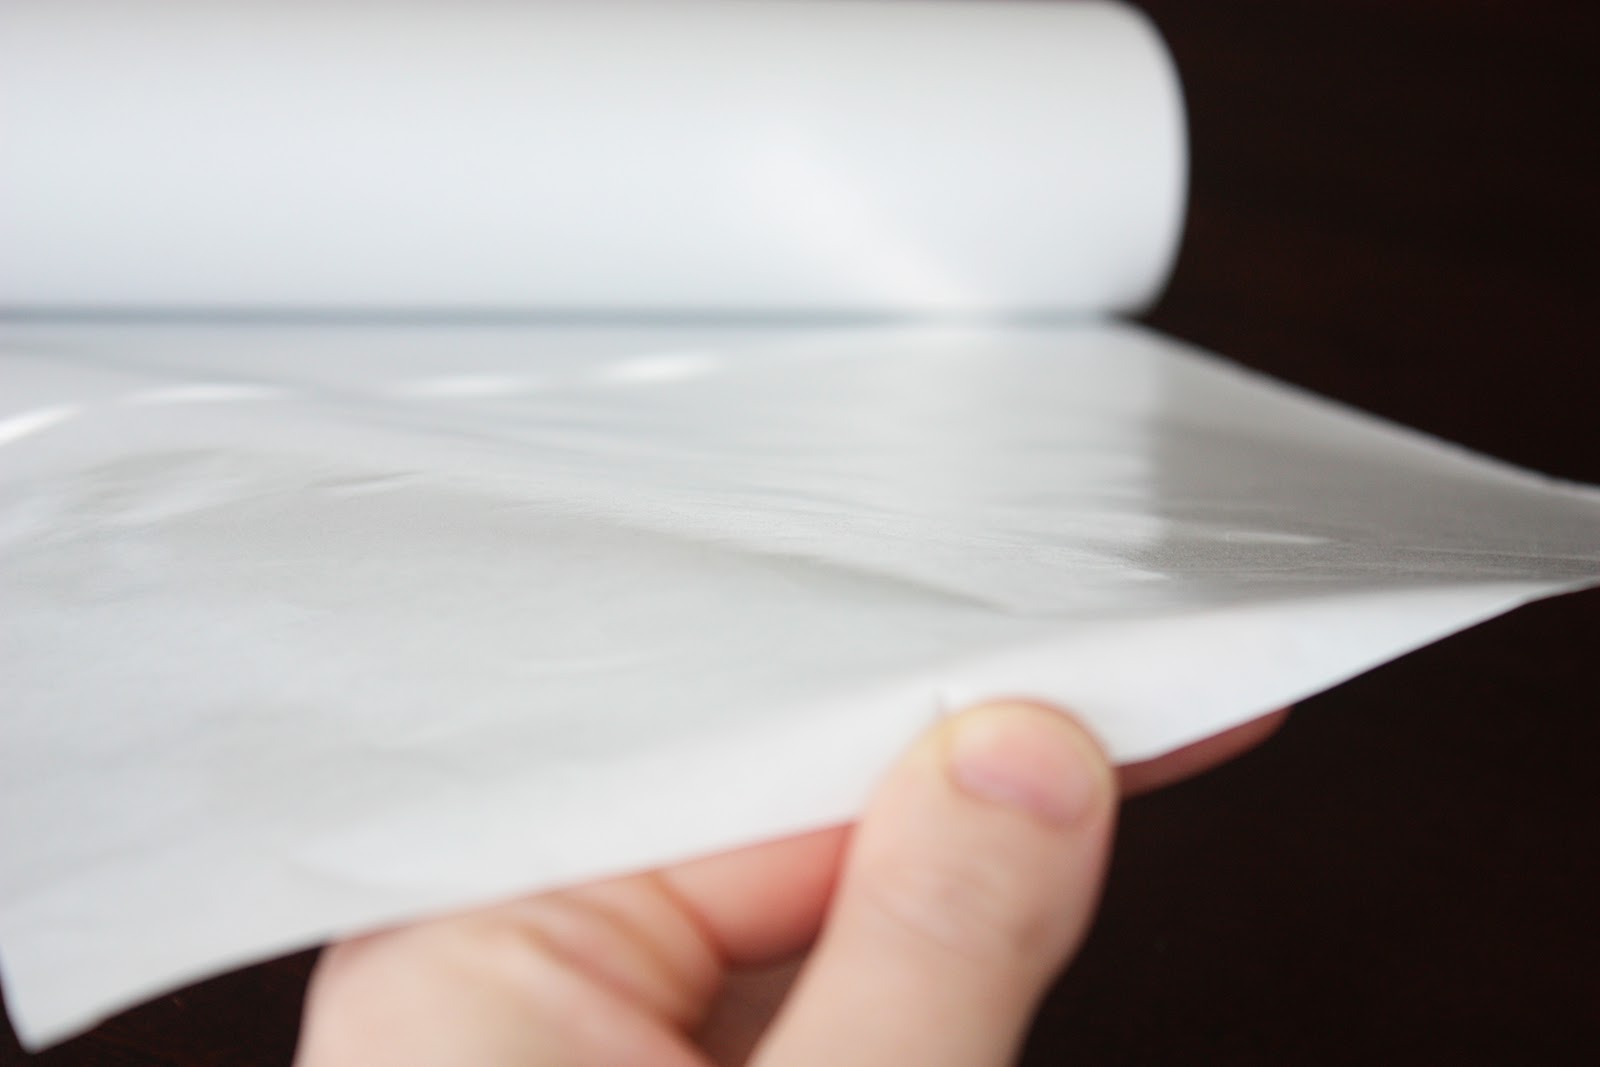 Waxed Paper vs Freezer Paper – Which Is Best For Woodworkers